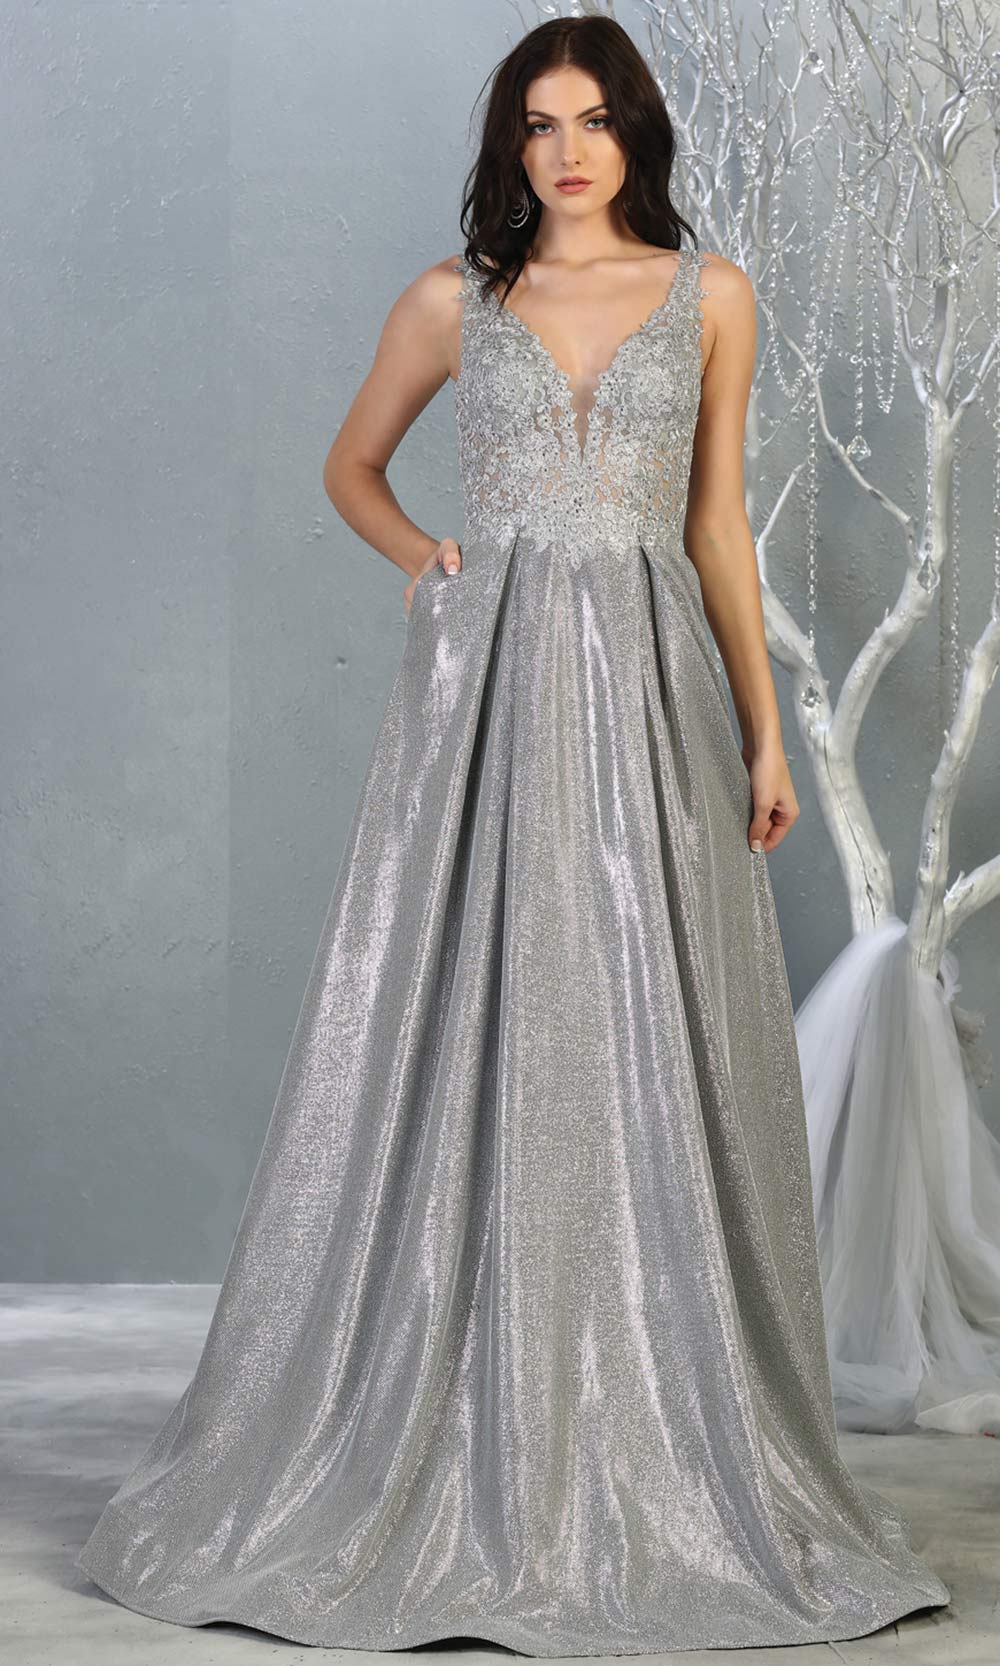 Mayqueen MQ 1785 long silver grey v neck evening flowy dress. Full length light gray satin metallic gown is perfect for  enagagement/e-shoot dress, formal wedding guest, indowestern gown, evening party dress, prom, bridesmaid. Plus sizes avail.jpg